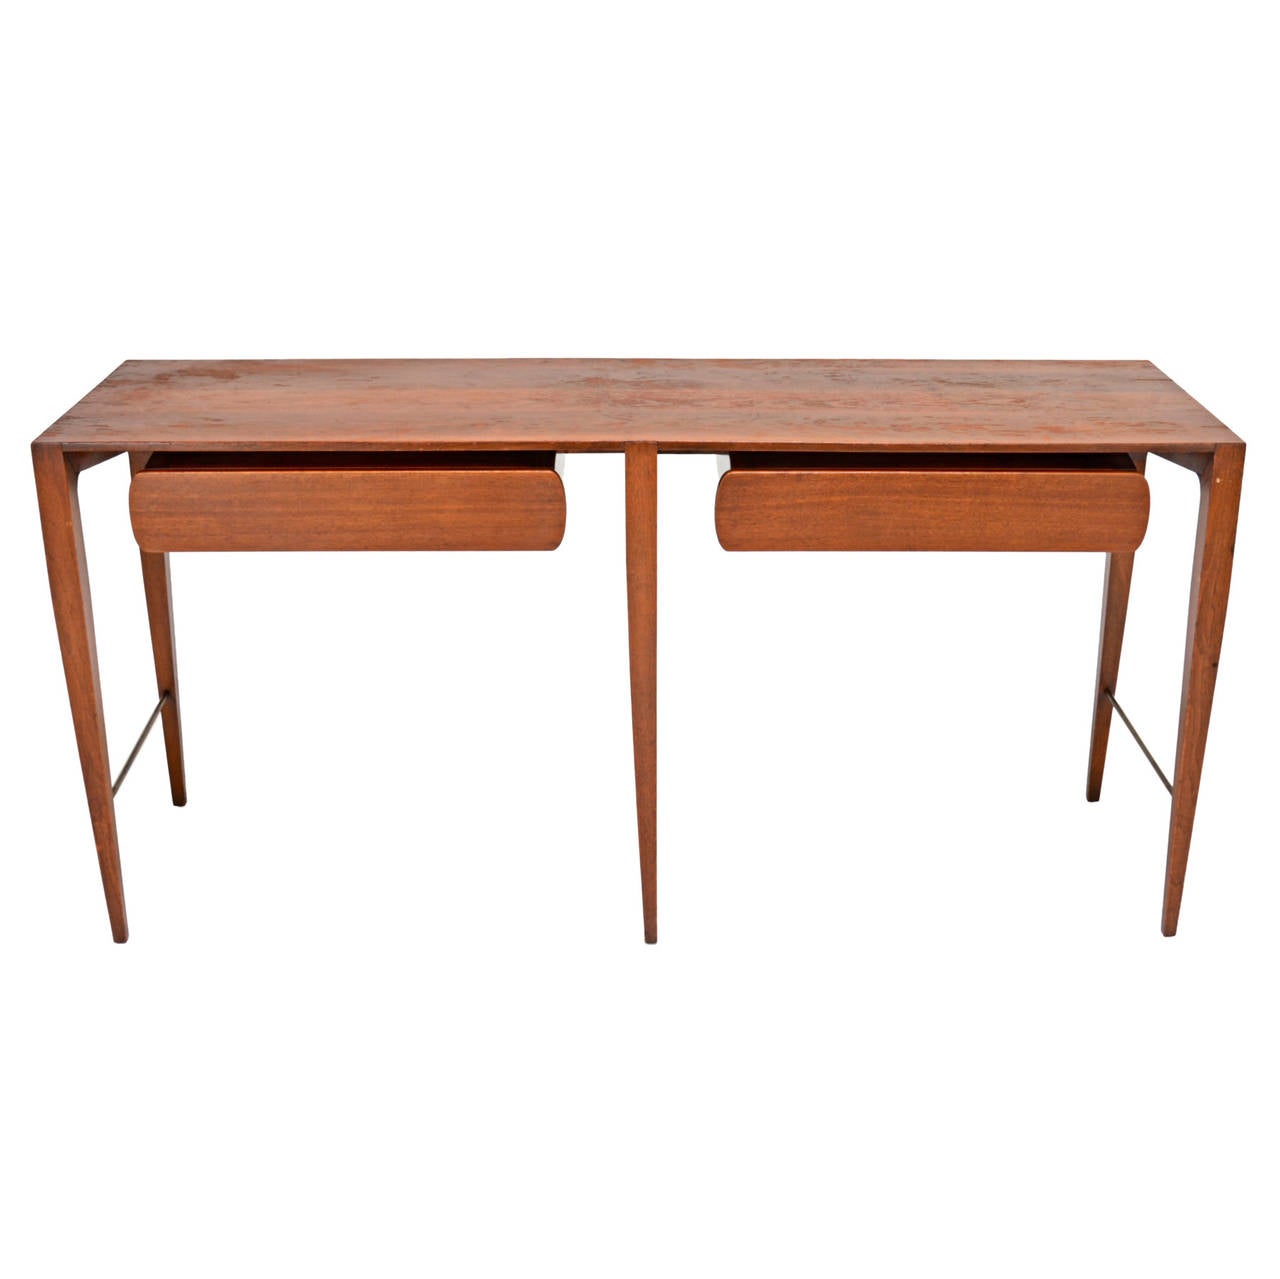 Elegant walnut and brass two drawer console table.  Unmarked with certificate of authenticity from the Ponti Archives.